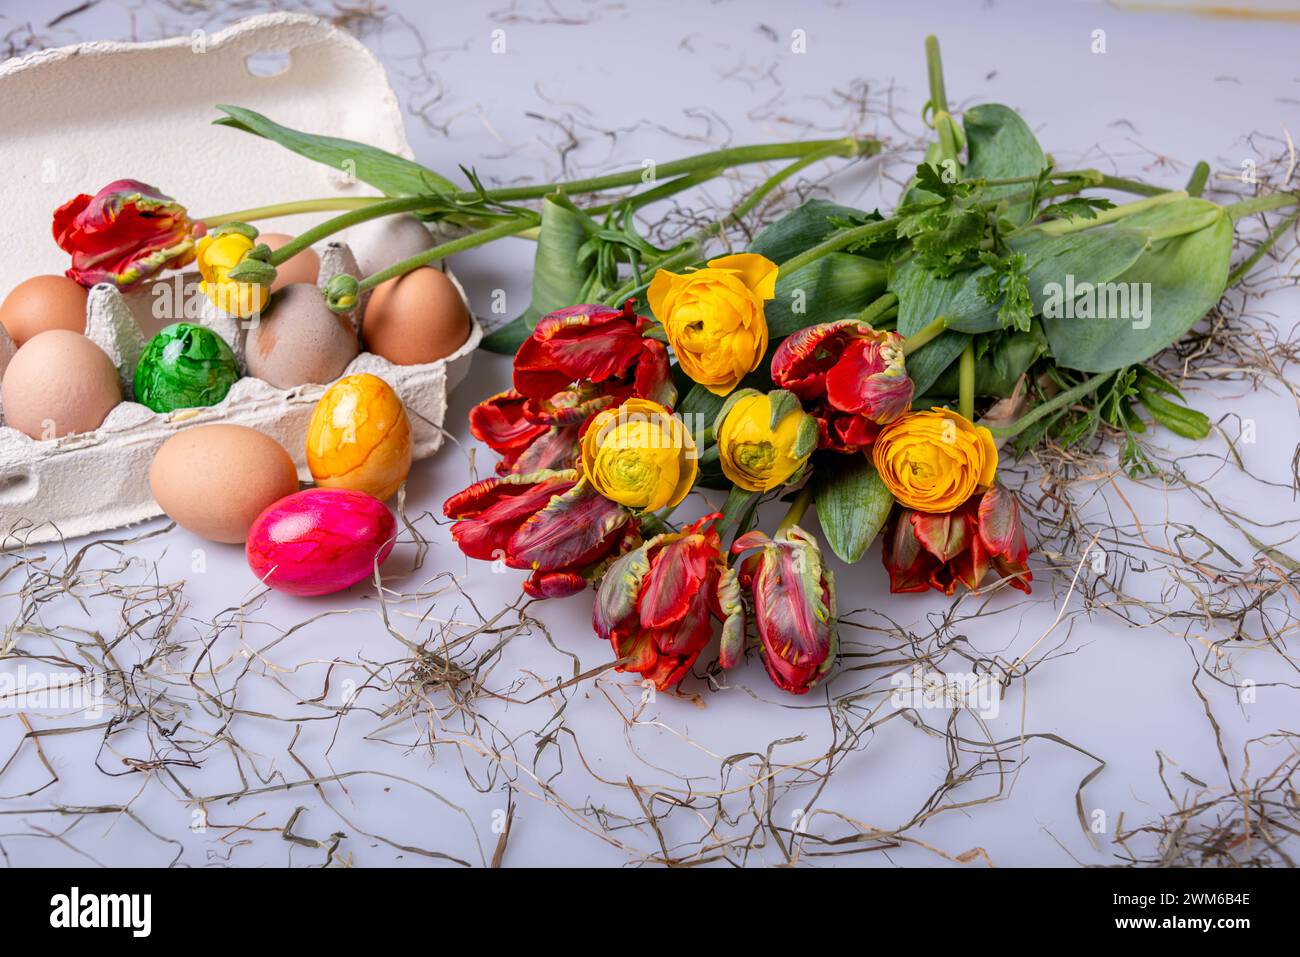 Bunte Ostereier auf einem Tisch mit Bumenstrauß als Postkartenmotiv zu Ostern *** Colorful Easter eggs on a table with a bouquet of flowers as a postcard motif for Easter Stock Photo